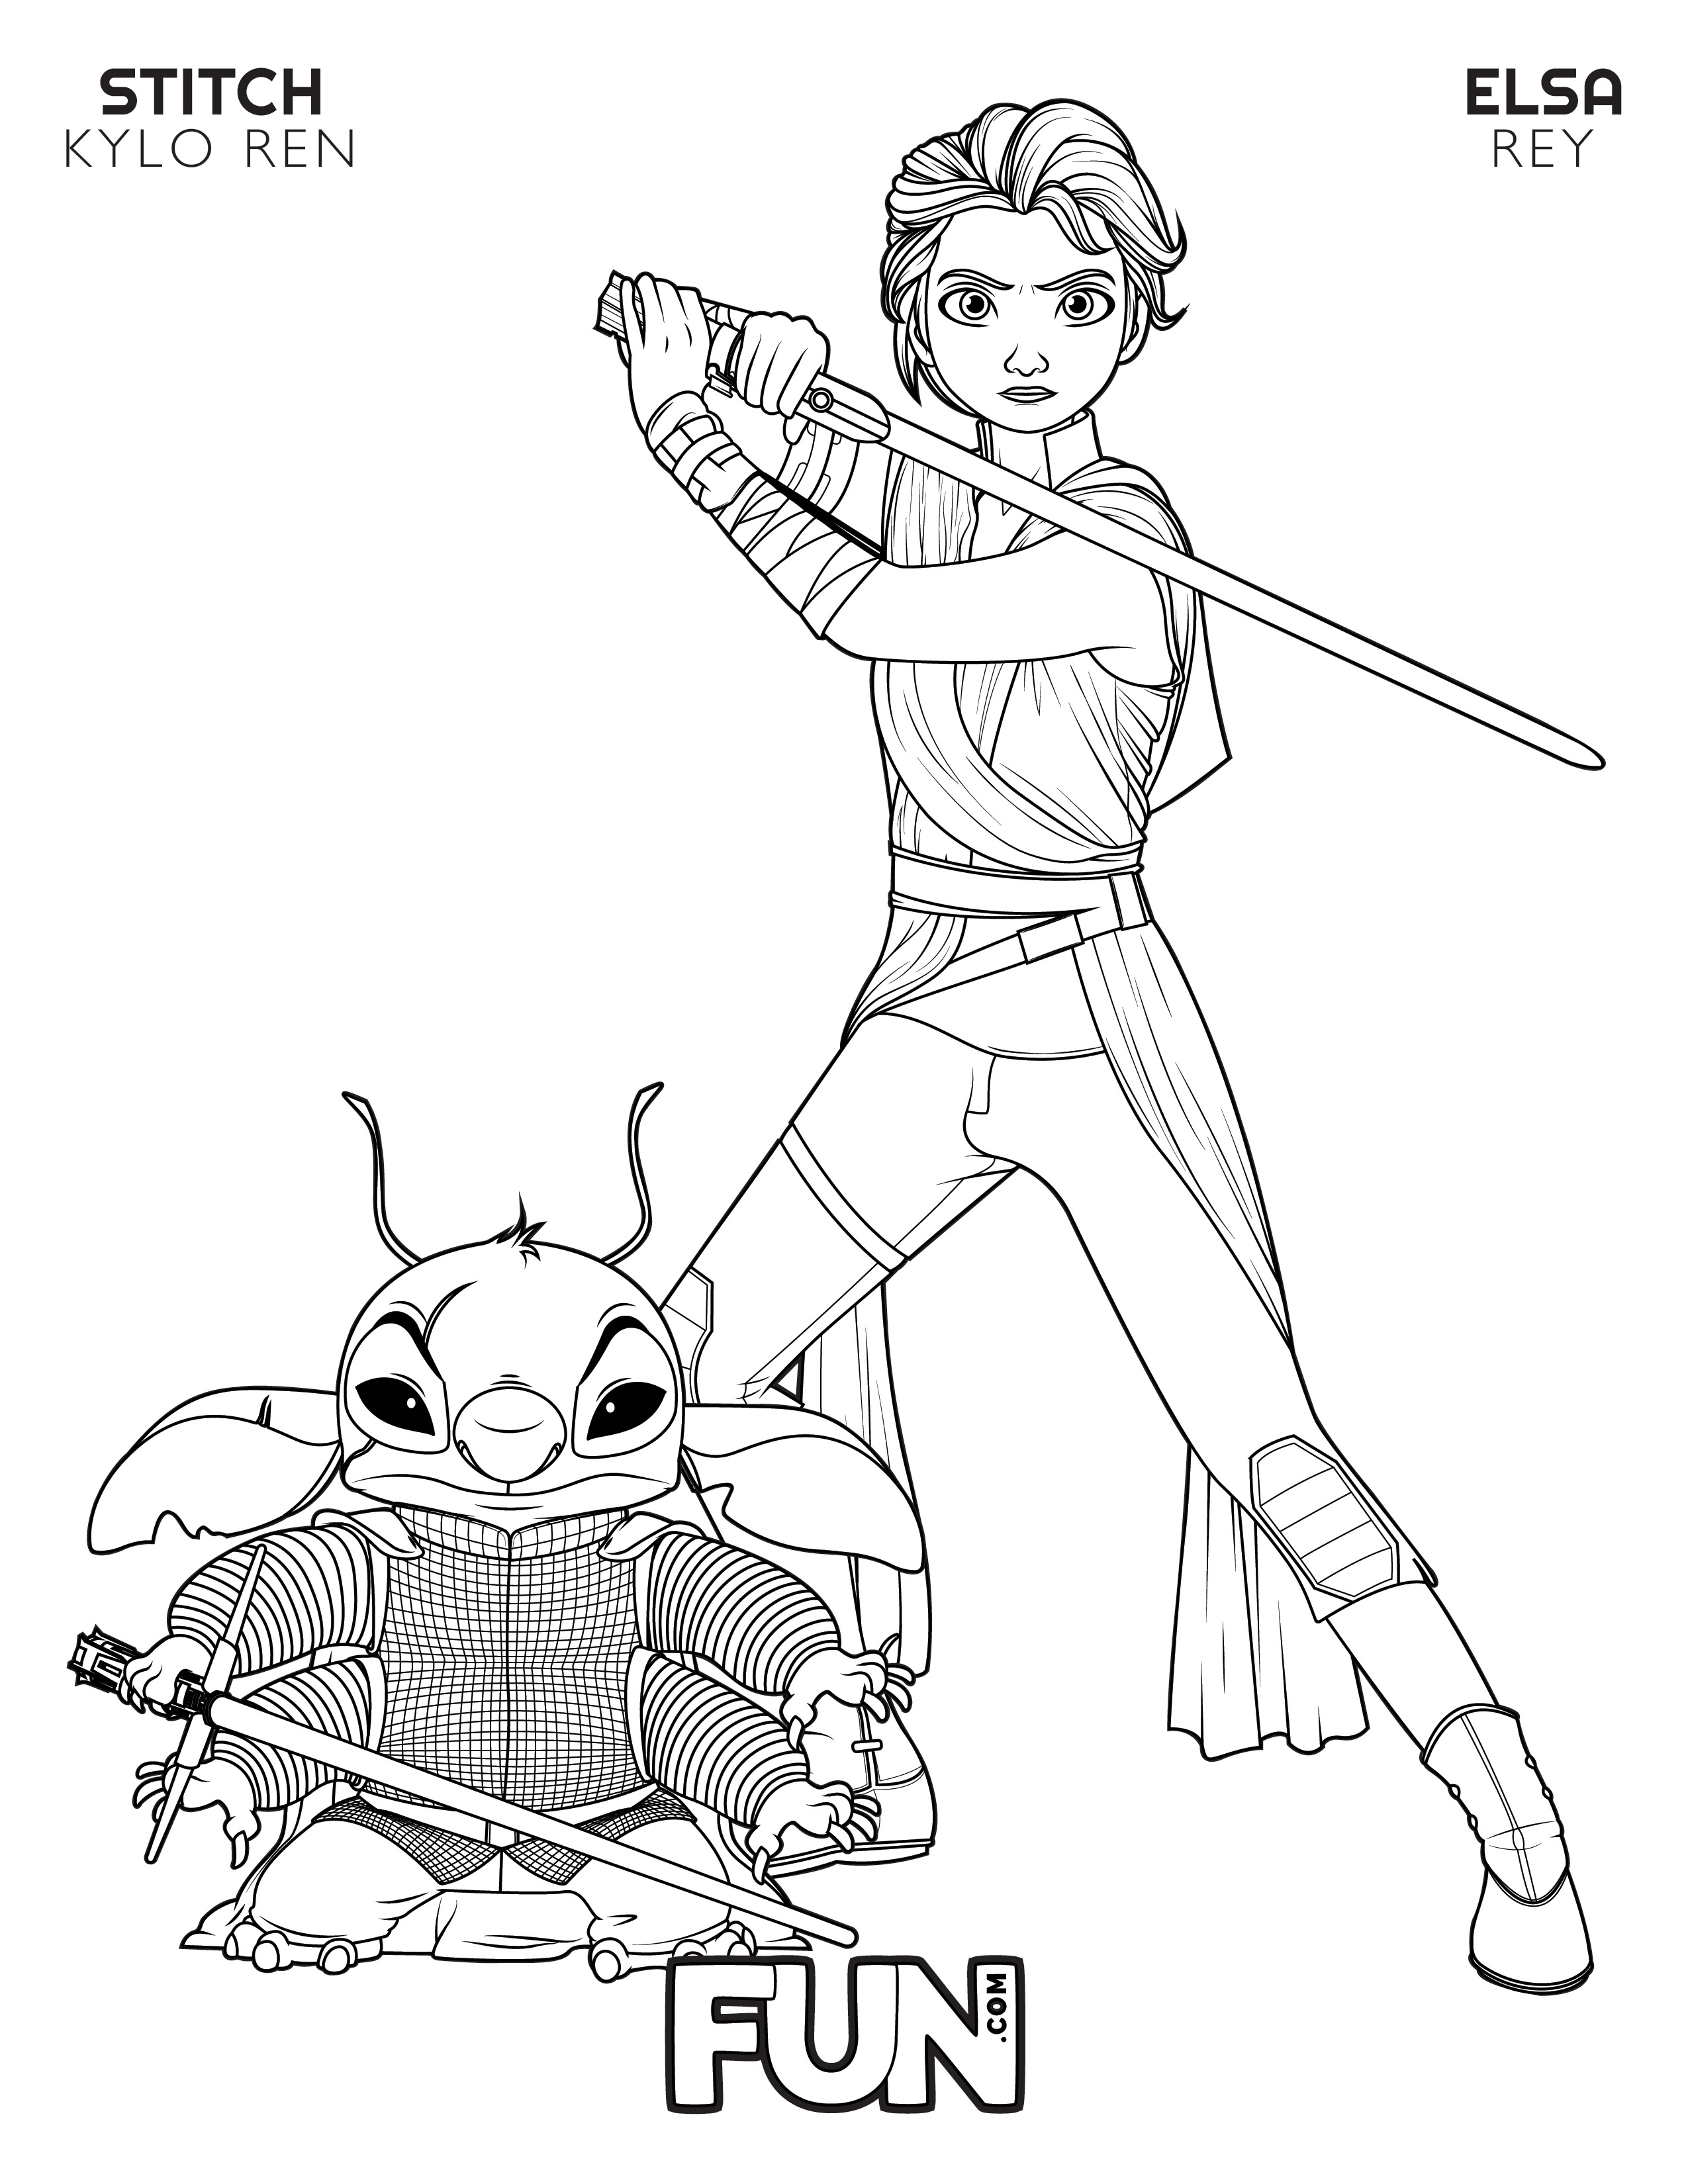 Elsa Rey and Stitch Kylo Ren Coloring Page